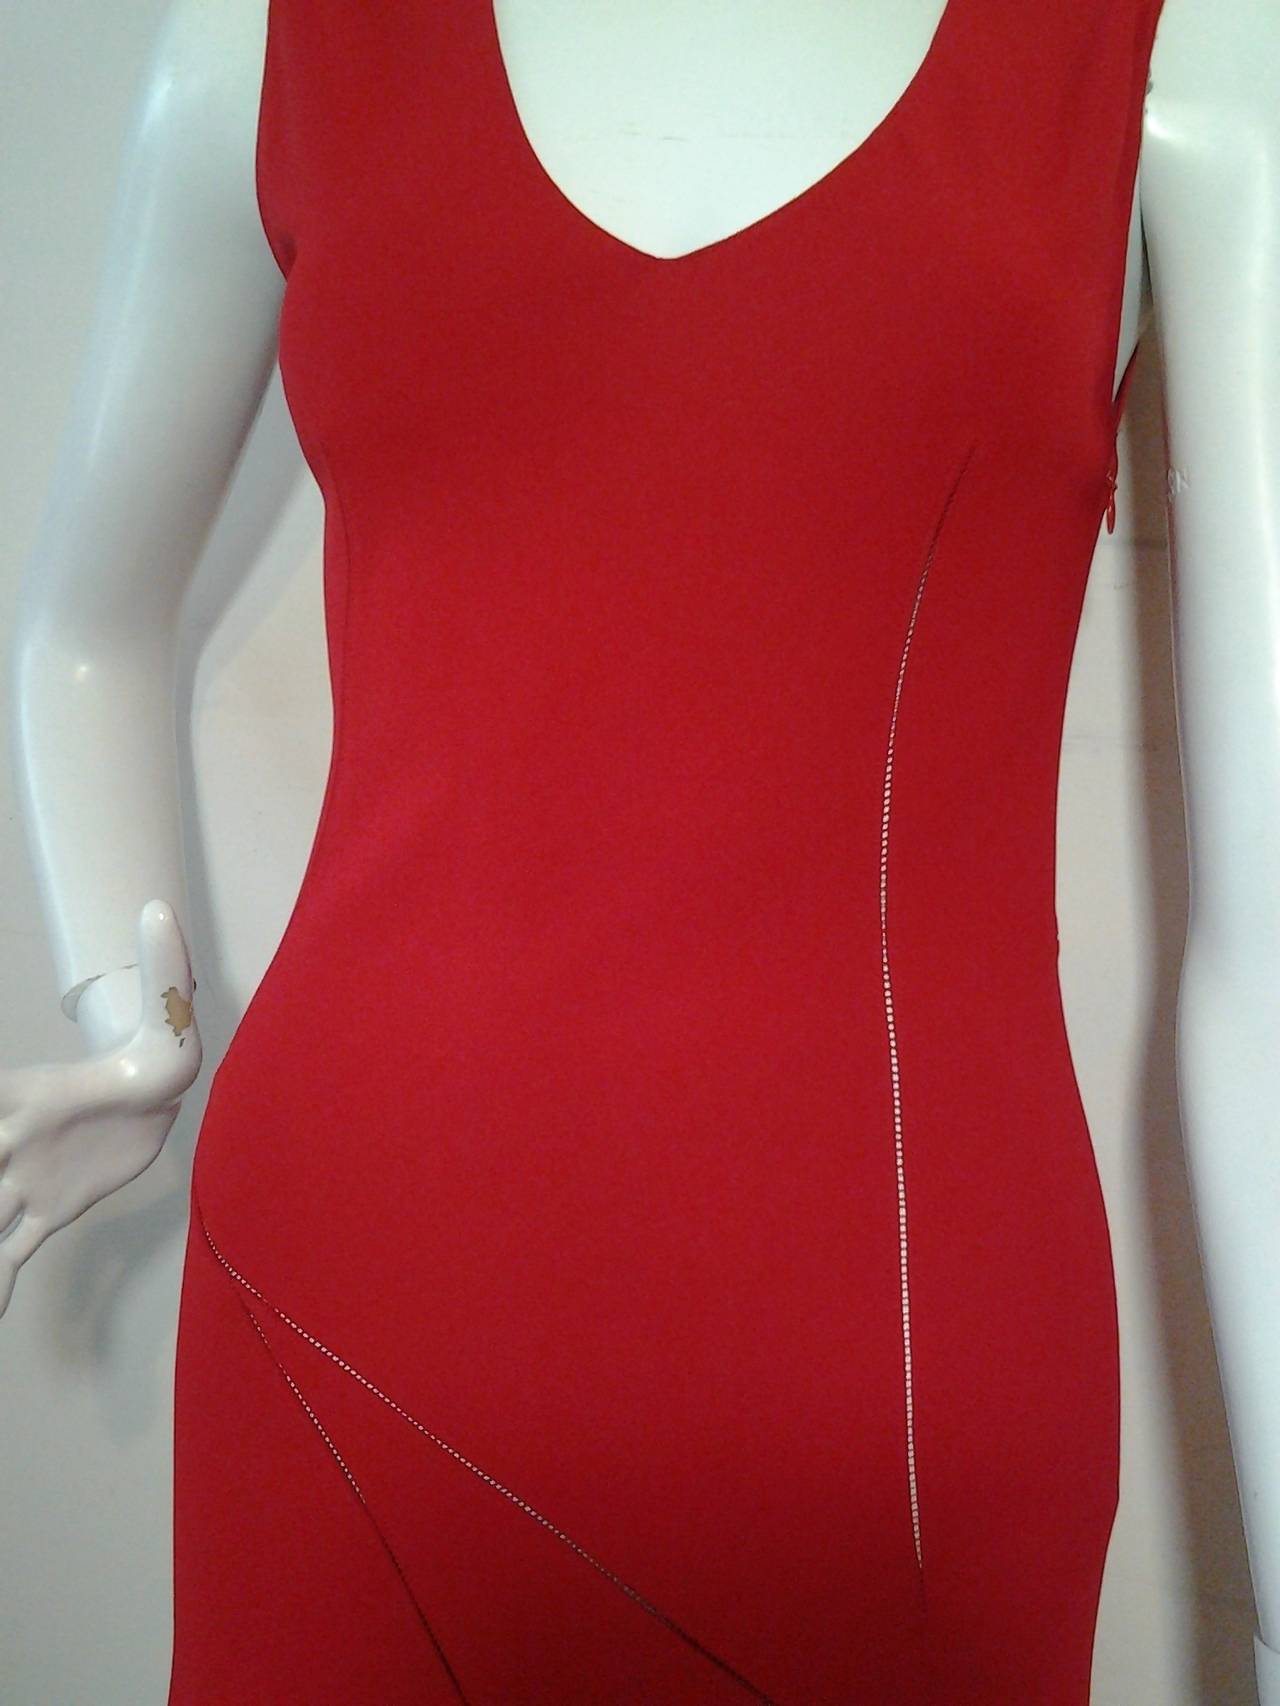 Women's Alaia Cherry Red Rayon Crepe Dress with Asymmetrical Seaming